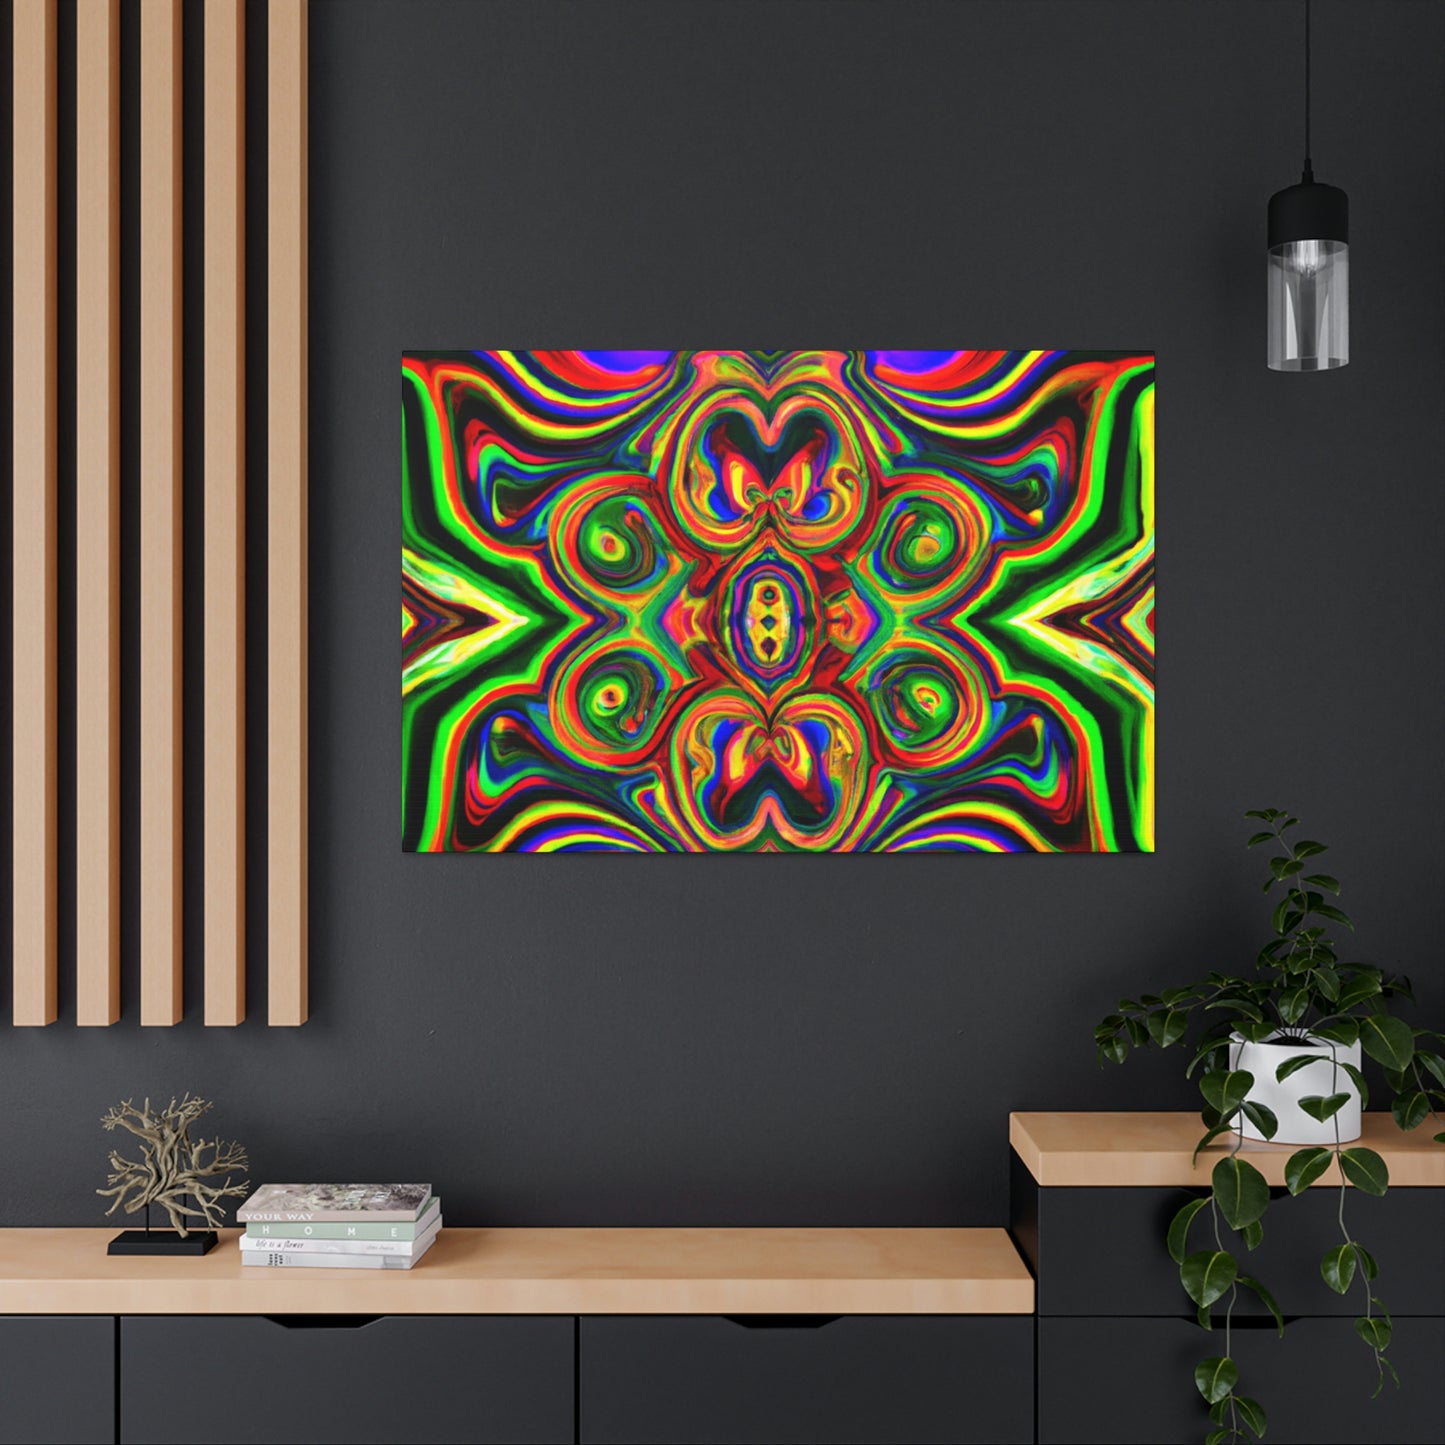 Abner Cartoon - Psychedelic Canvas Wall Art